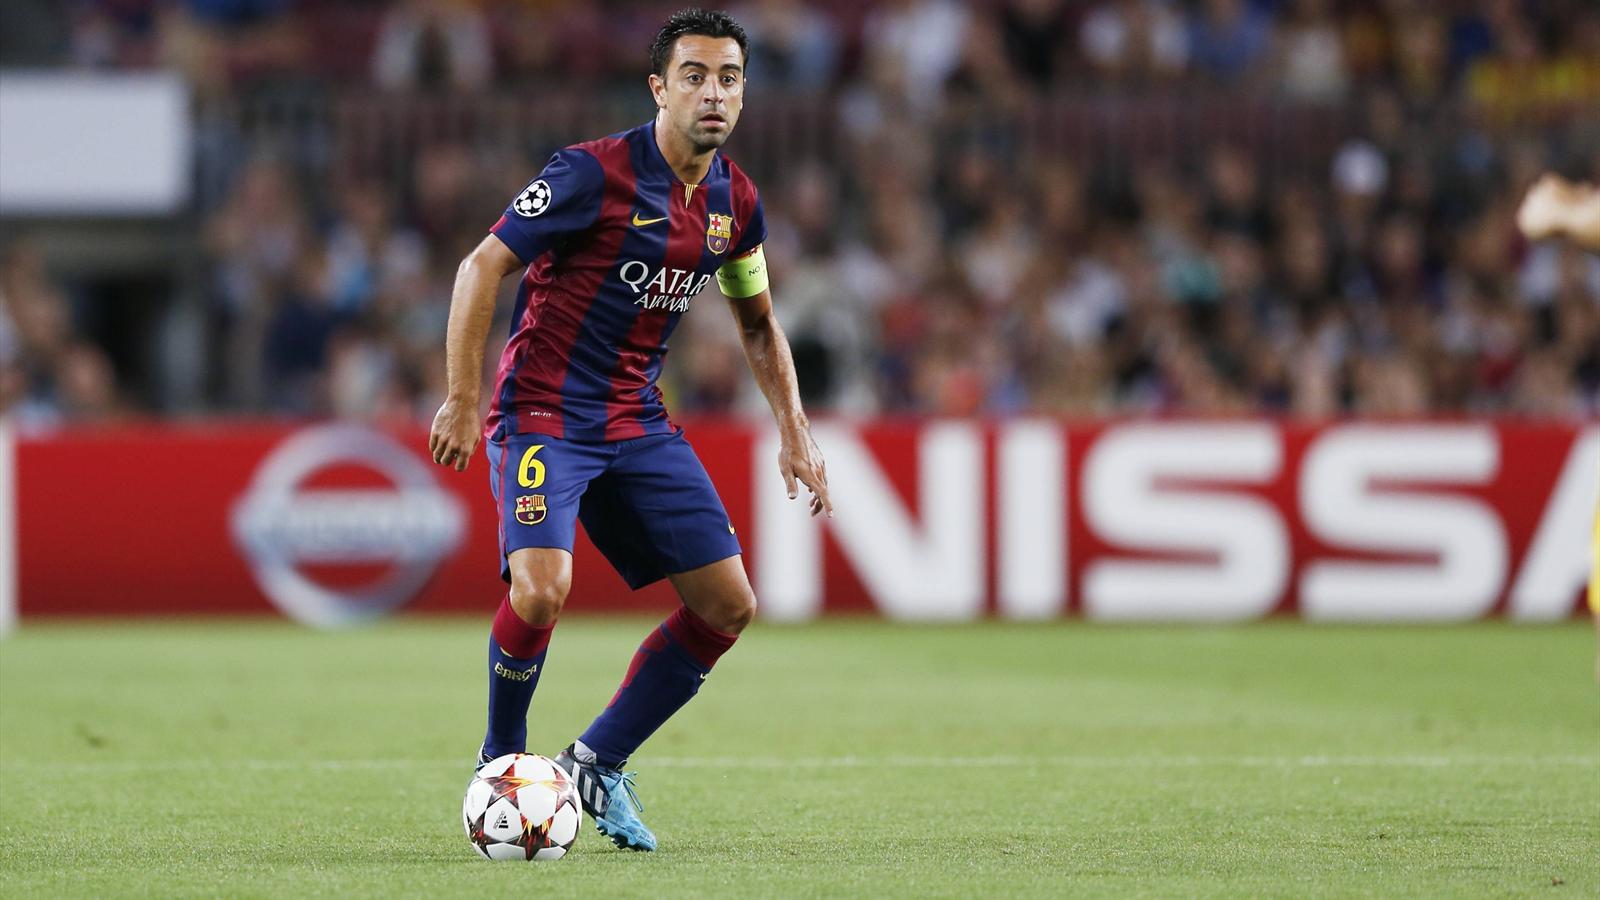 You Can Xavi Hernandez In Your Puter By Clicking